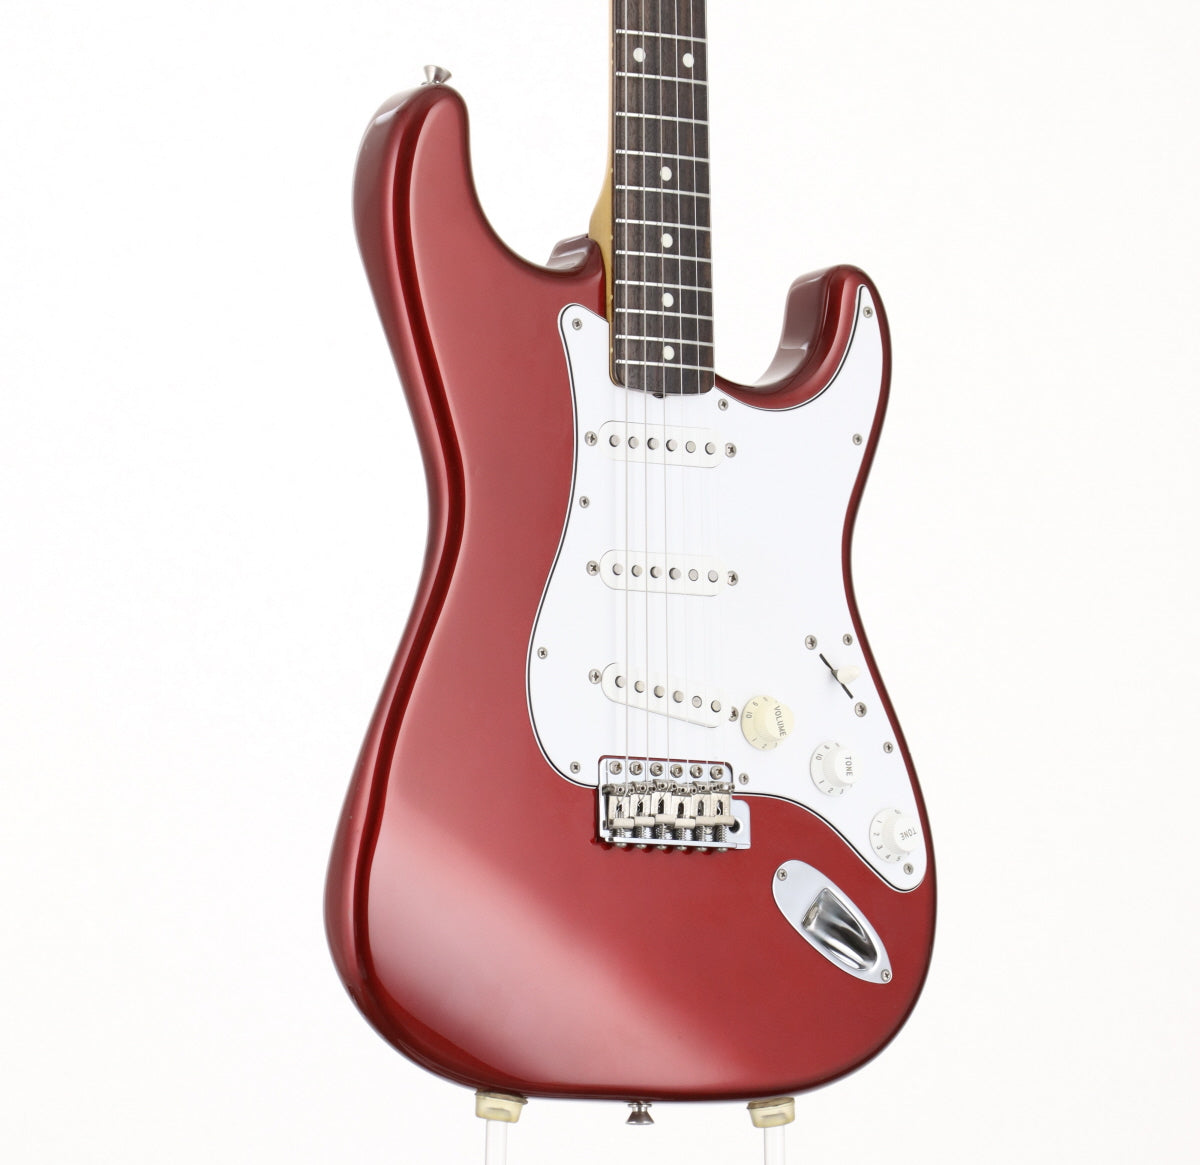 [SN T090747] USED Fender JAPAN / ST62 OCR Old Candy Apple Red 2007-2010 [09]